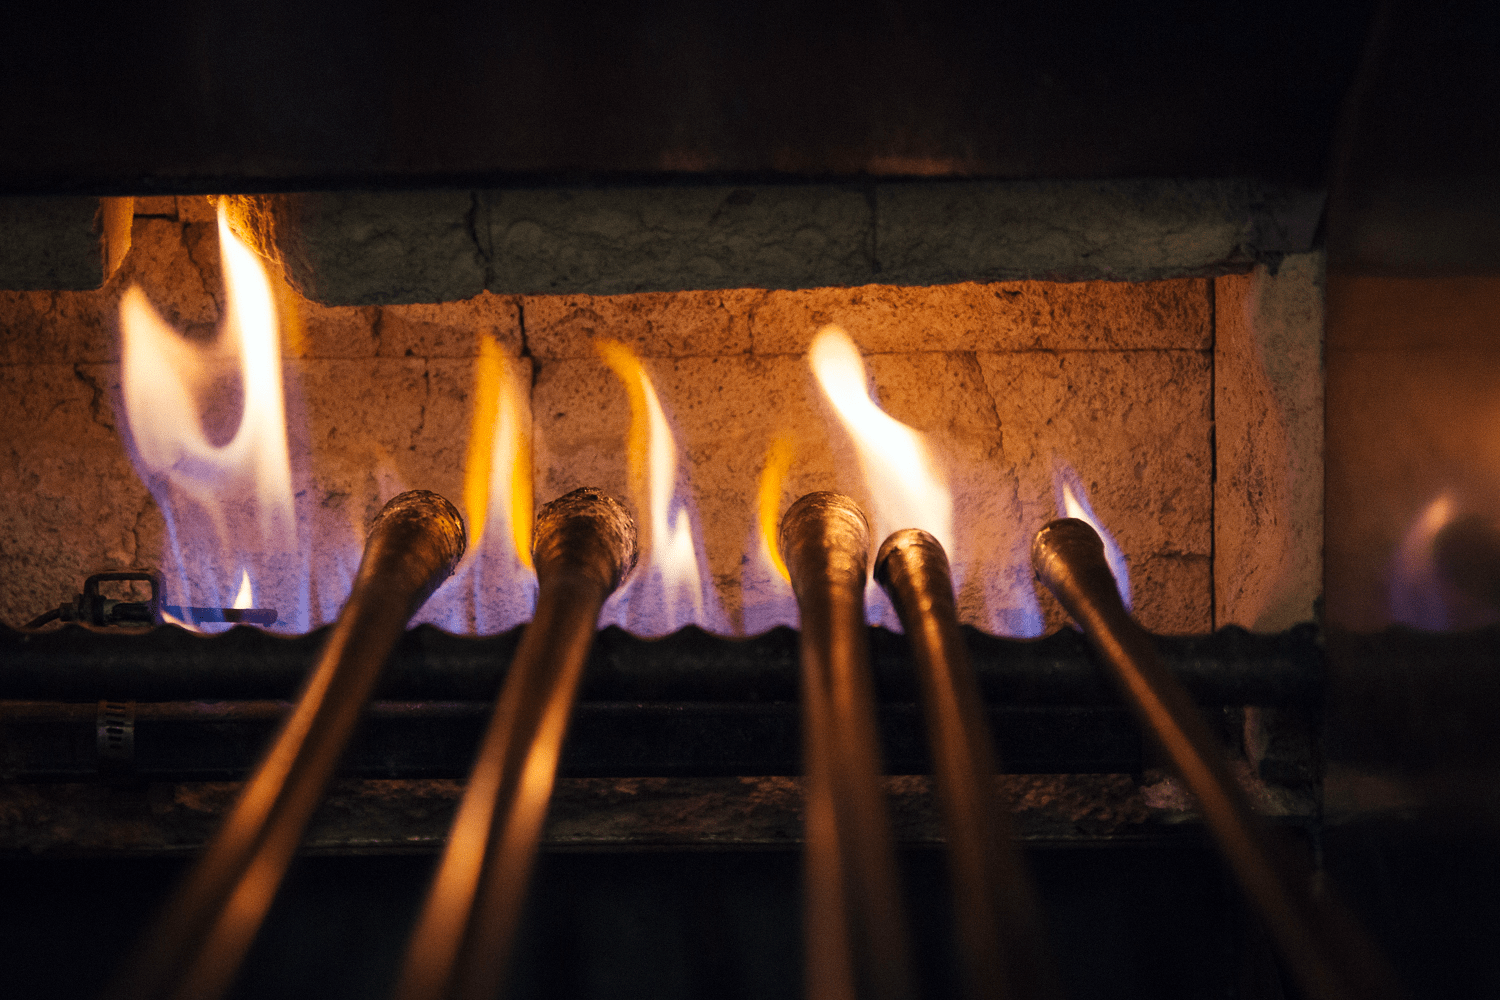 Photograph Of Metal Rods Being Heated Over An Open Flame.